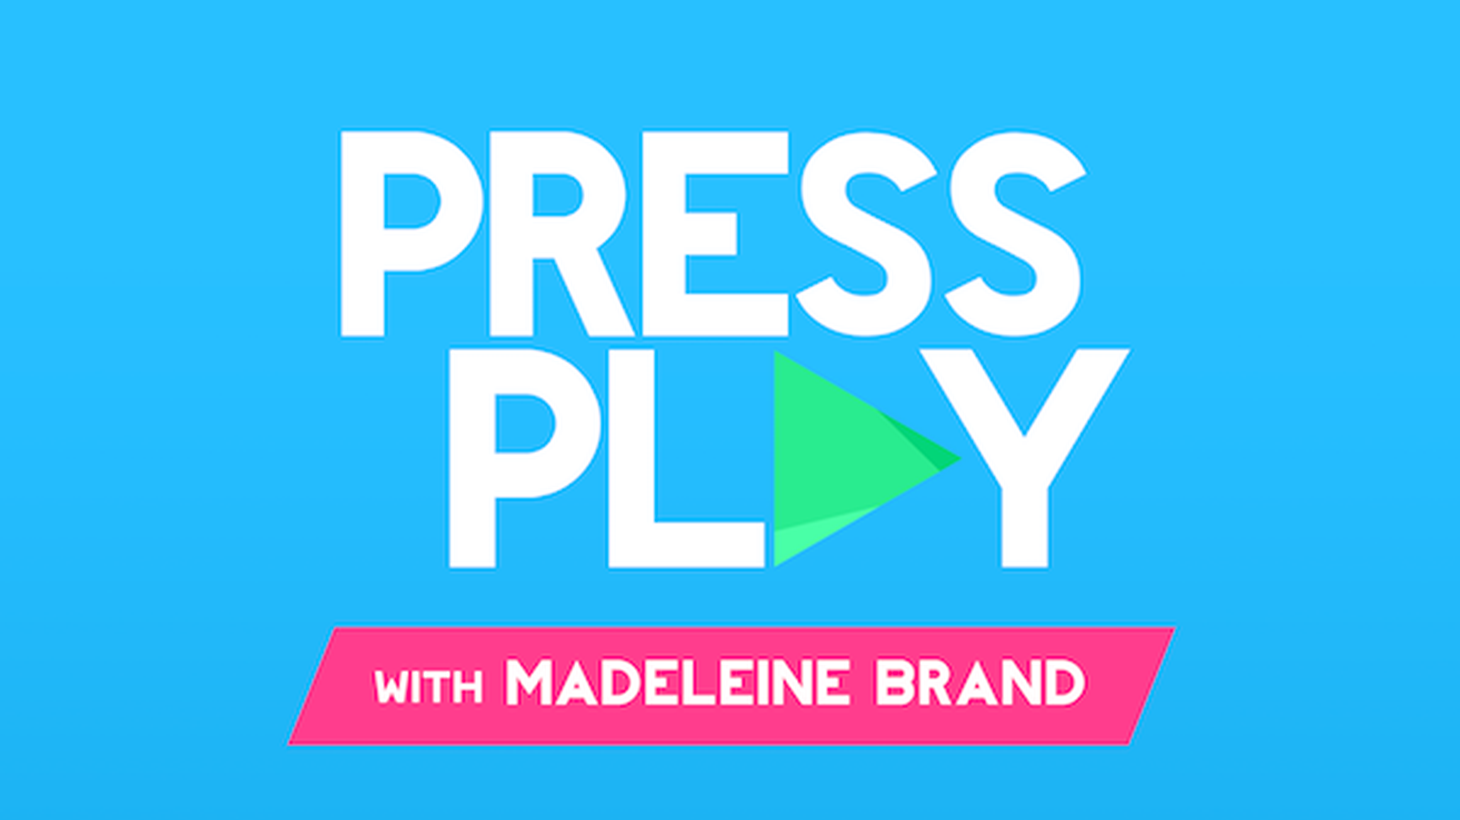 Today on Press Play: Leland Yee is accused of criminal wrongdoing, the state of the media, rethinking broccoli, and revisiting 'Free to Be... You and Me.'